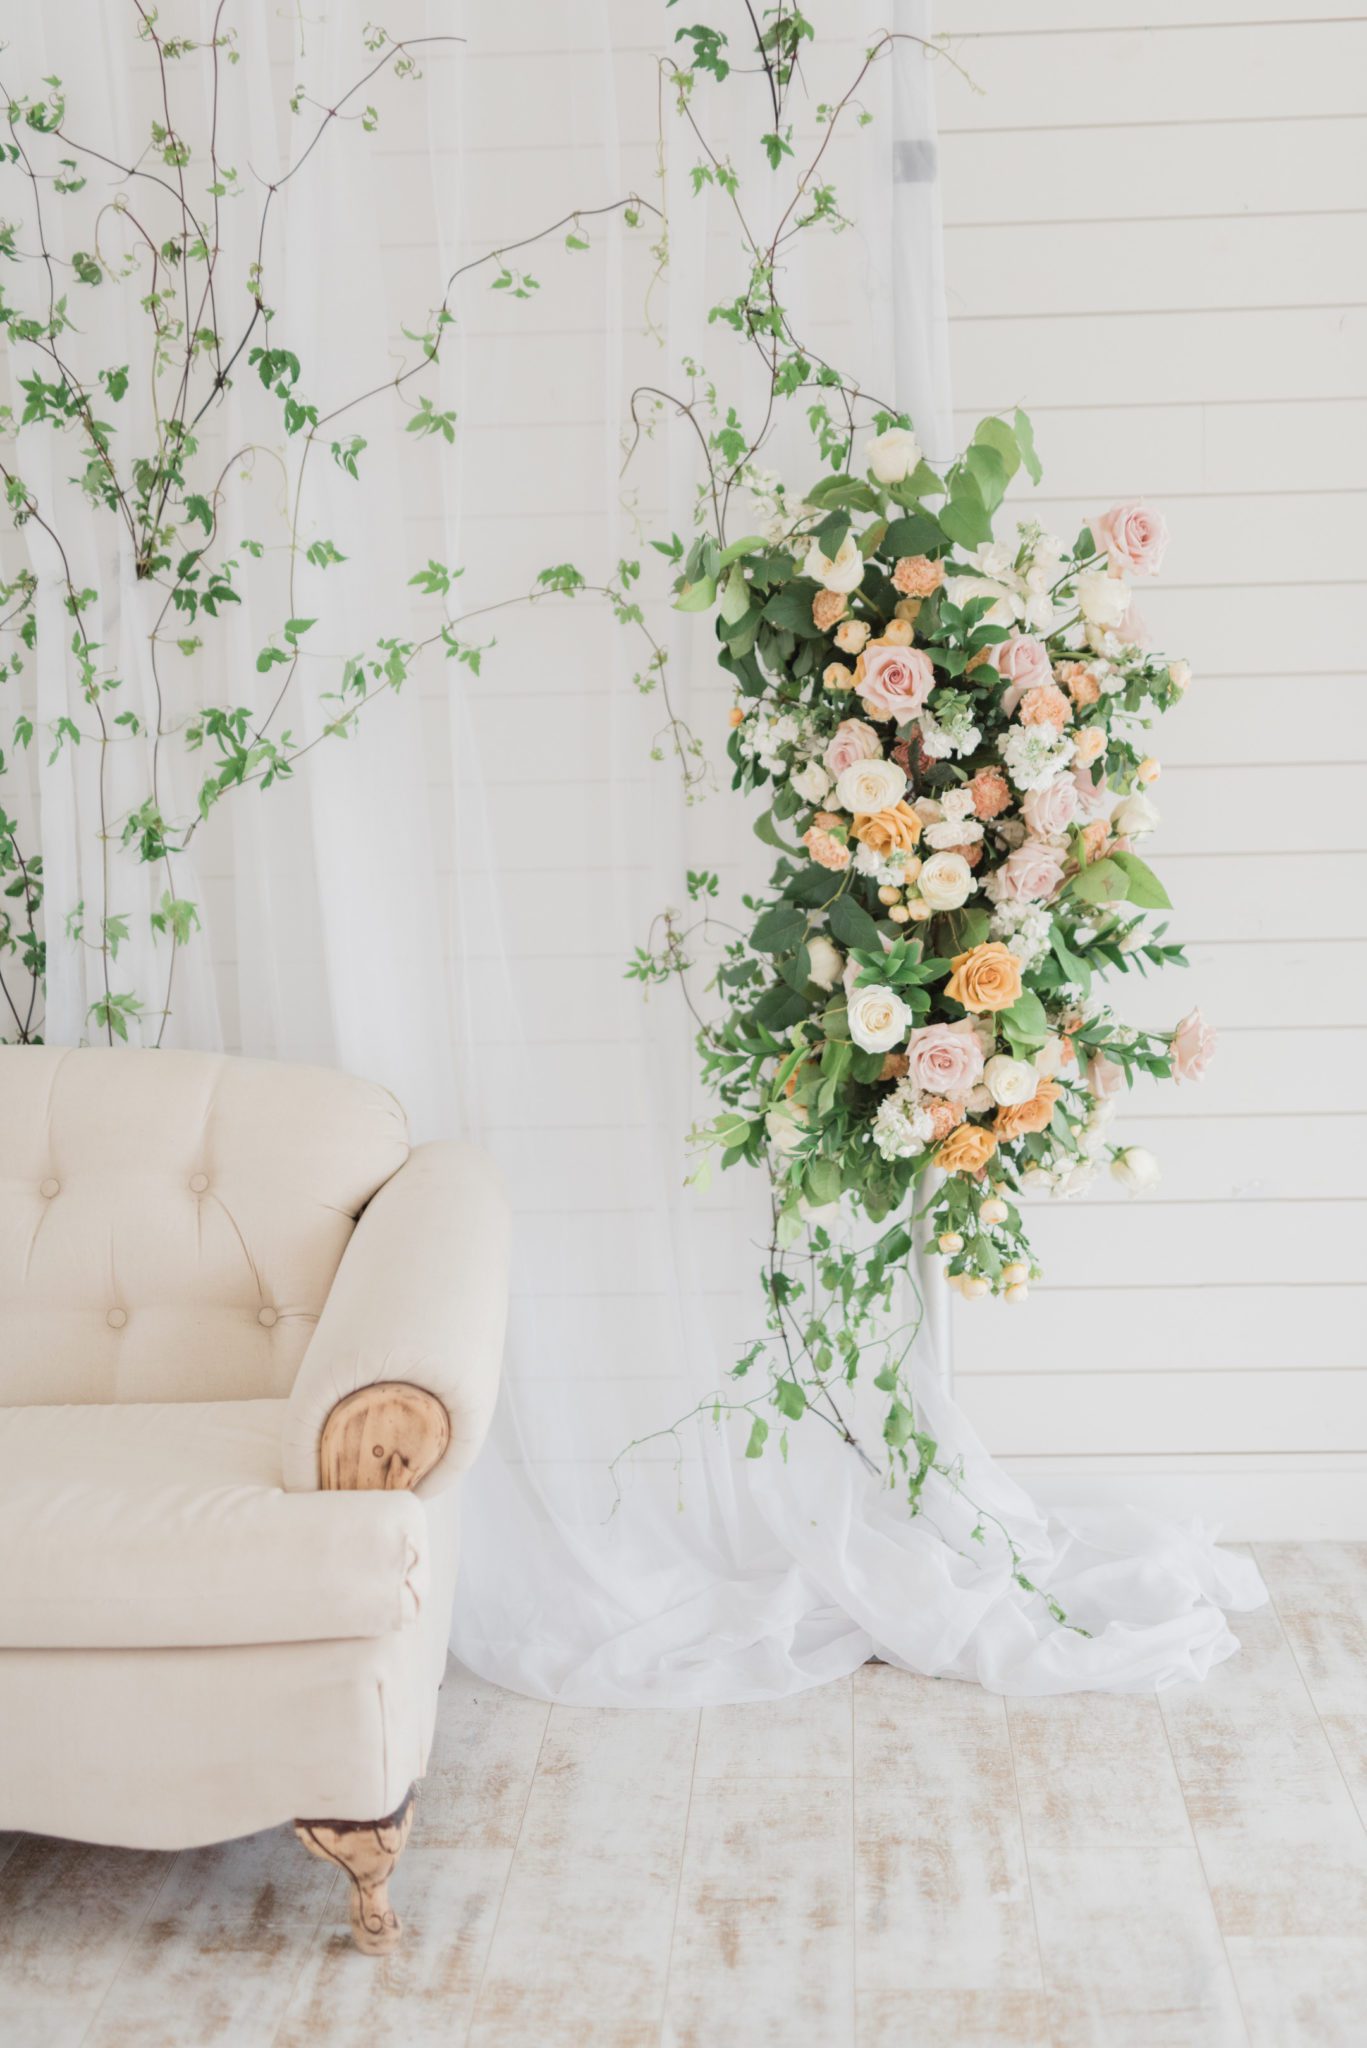 Romantic and minimal wedding decor with soft florals and a loveseat